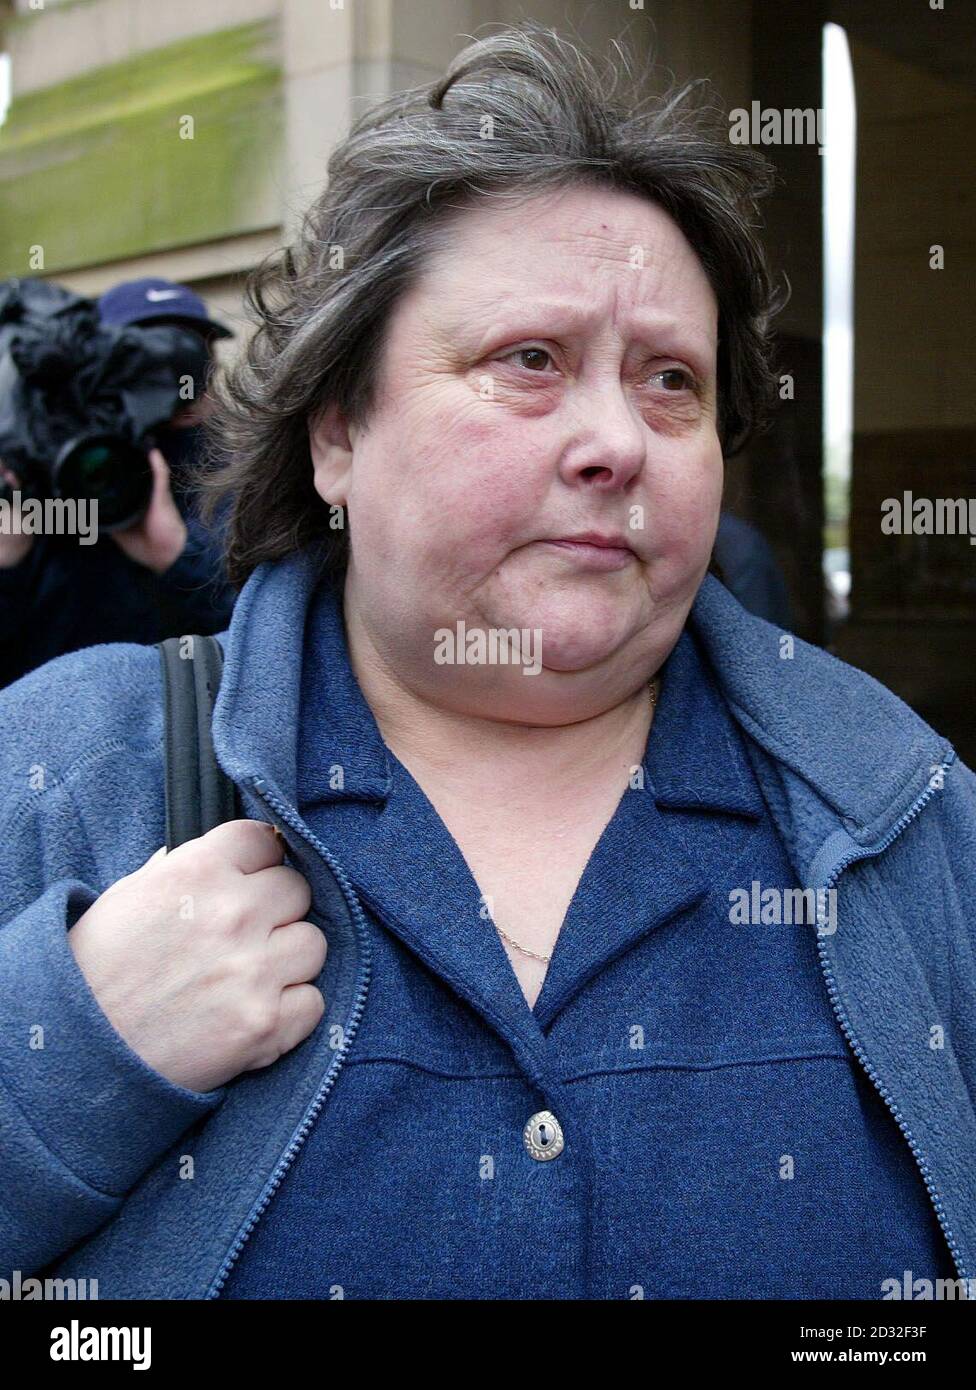 Joyce Jones, 52, leaves Bolton Magistrates after pleading guilty to a charge of animal cruelty, after a dog was found mistreated at her home in Westhoughton, Bolton. RSPCA officials rescued a filthy and neglected dog following an anonymous call. *... The mother of three has escaped jail sentencing, with the case now adjourned until May 17 for the preparation of reports. 17/05/02: Joyce Jones, who was banned from keeping animals for life by magistrates at Bolton, Greater Manchester. Her dog, Digby, a 14-year-old bearded collie, was found trapped in a kitchen, with his matted fur covered in Stock Photo